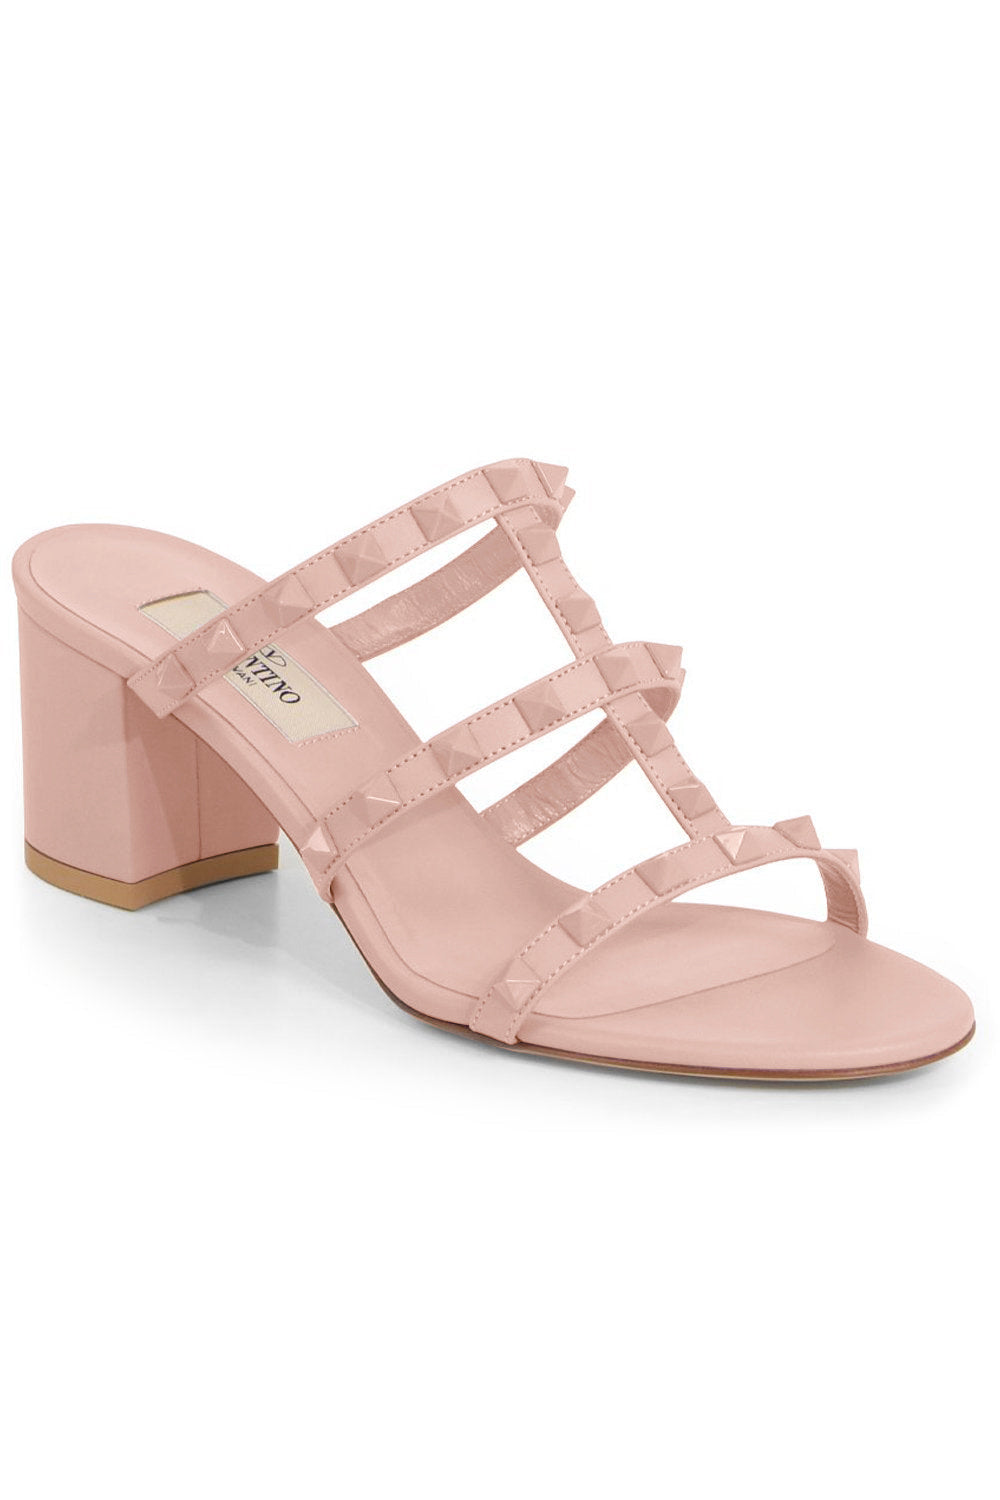 VALENTINO SHOES ROCKSTUD THREE STRAP 60MM MULE | ROSE CANNELLE